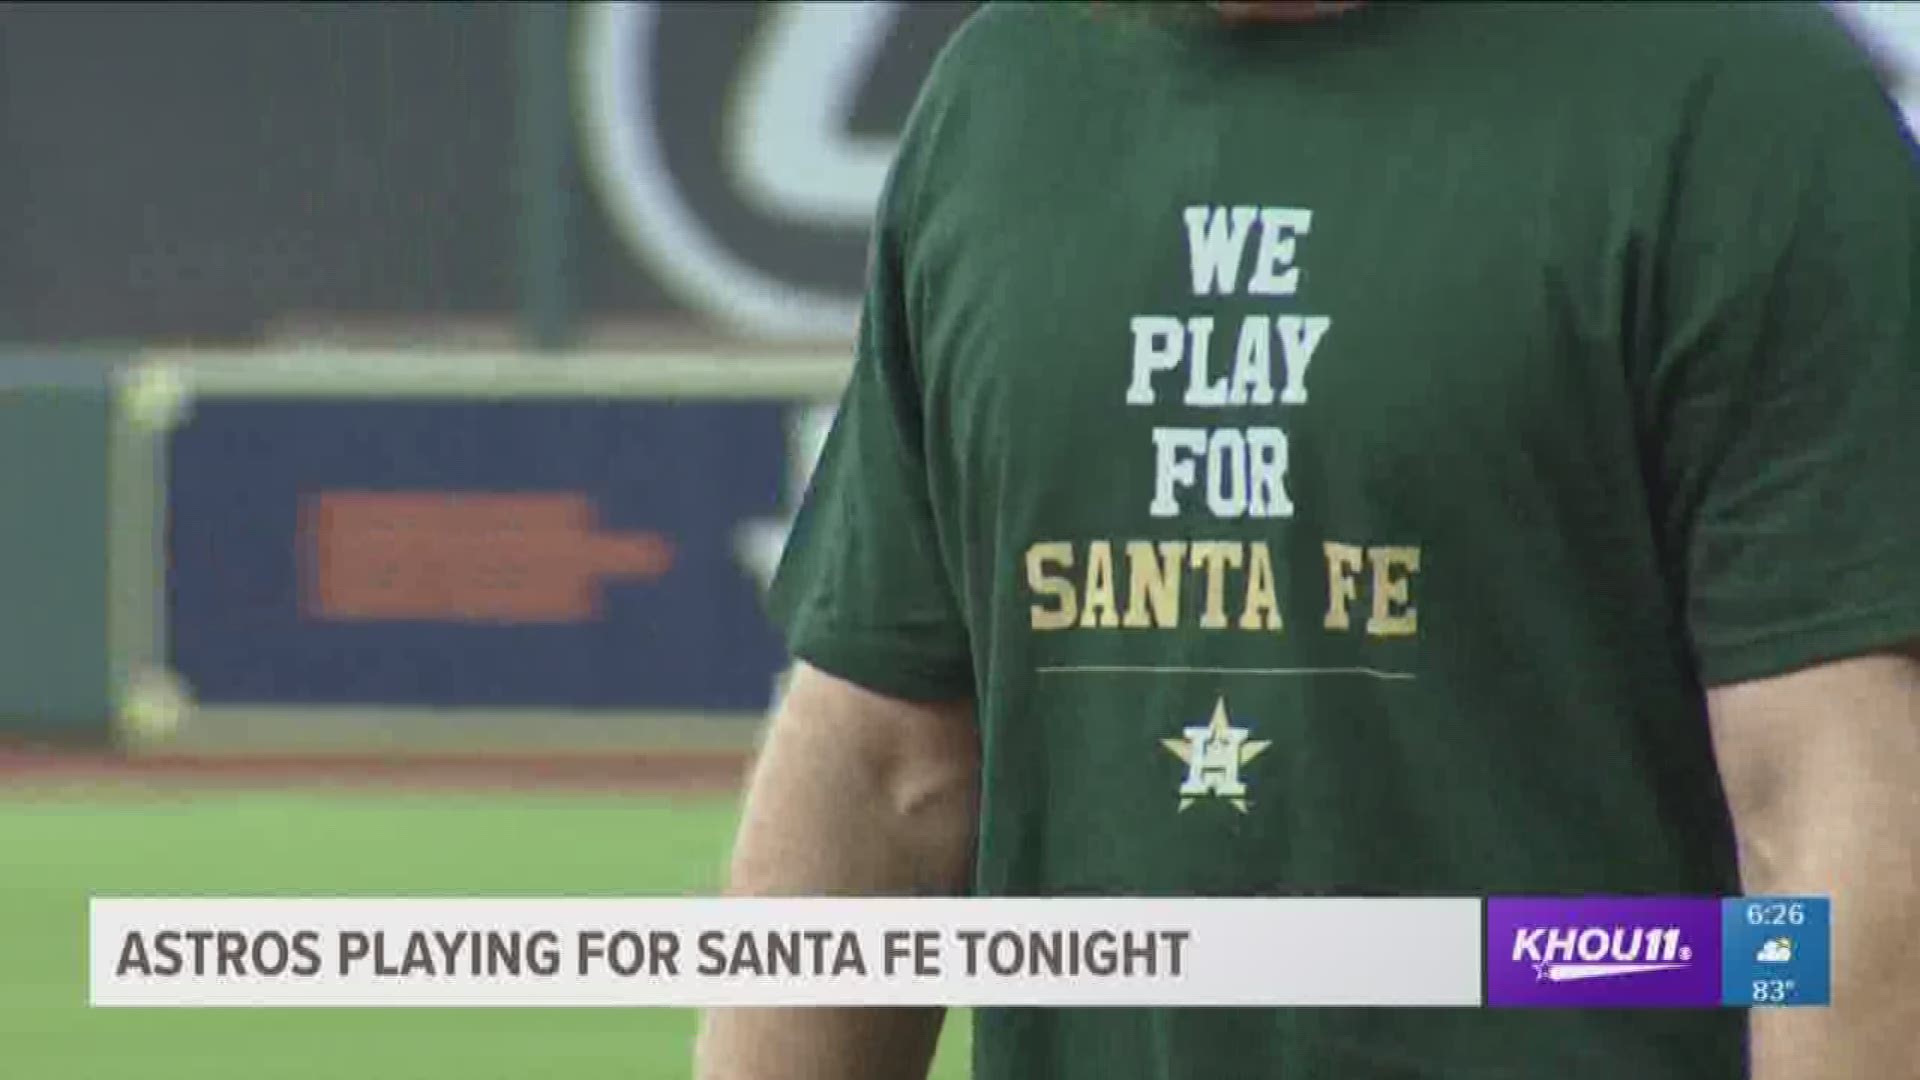 Before suiting up for their game against the San Francisco Giants Tuesday at Minute Maid Park, the Houston Astros showed their support for Santa Fe shooting victims at batting practice.